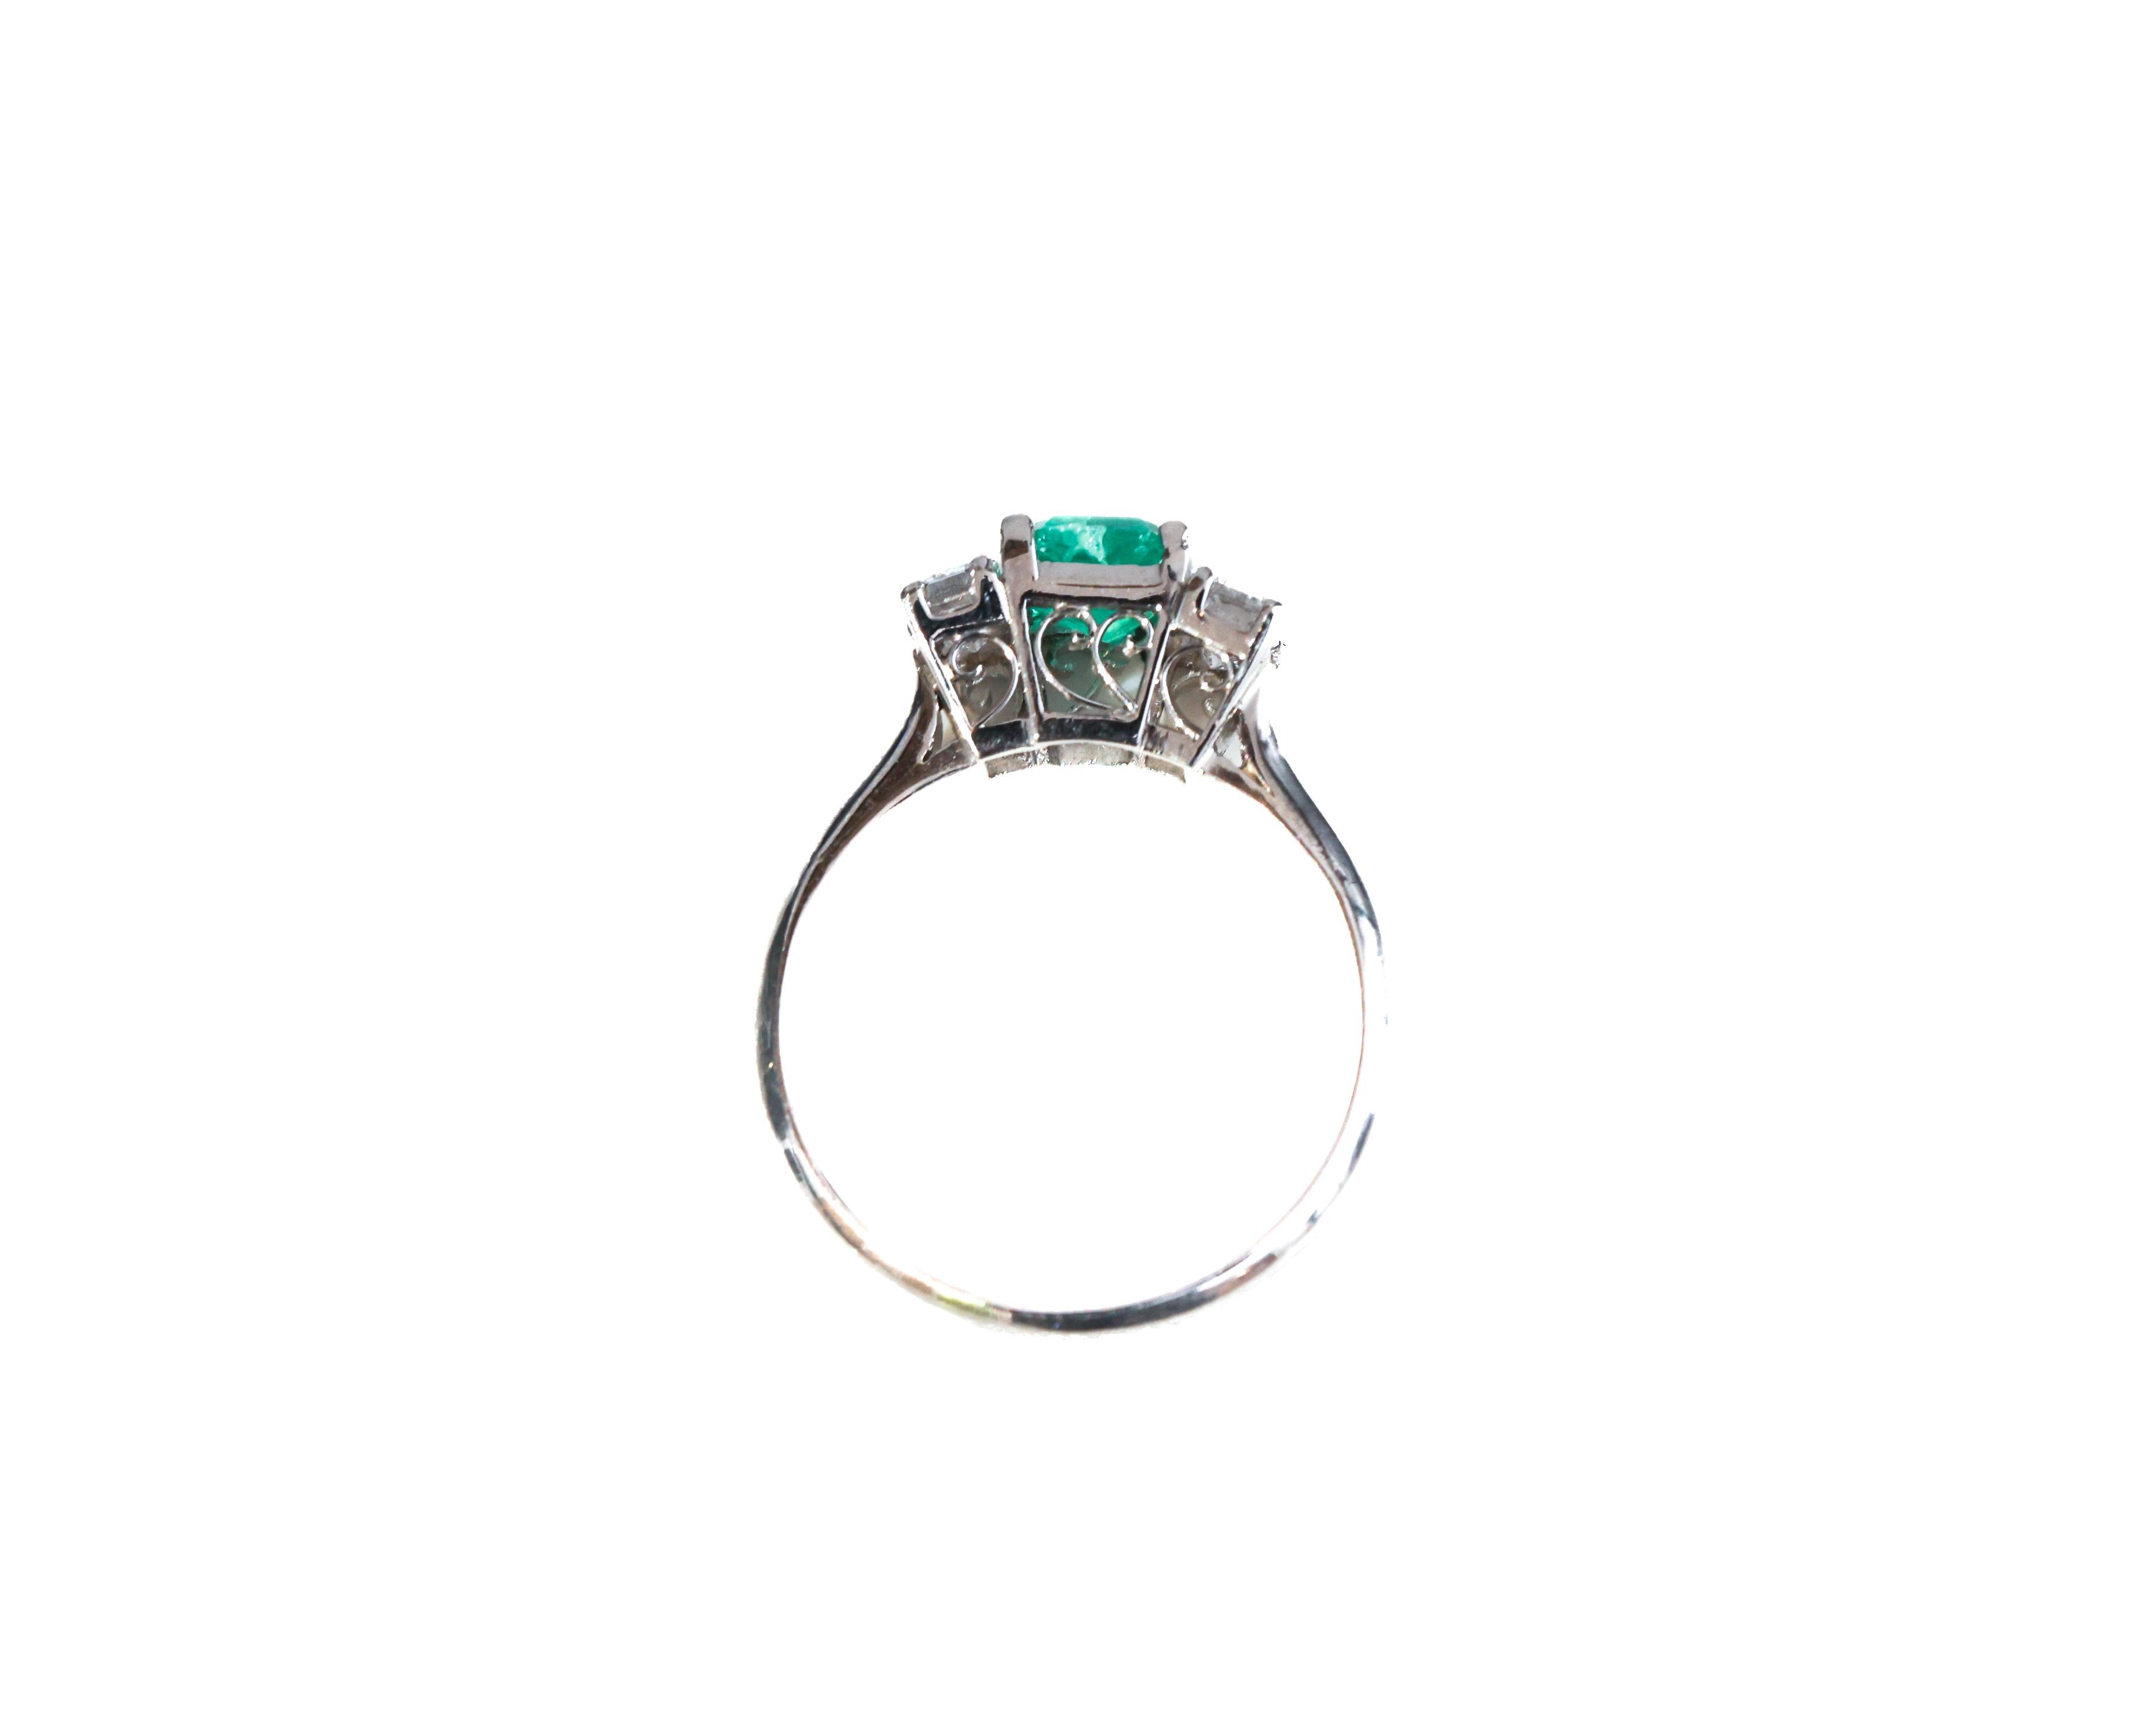 Ring Details:
Metal Type: Platinum
Weight: 3.5 grams
Ring Size: 5.5 (resizable)

Emerald Details:
Carat: .68 carat 
Color: Vibrant Green

Diamond Details:
Cut: Emerald Cut
Carat: .51 carat total weight 
Color: F
Clarity: VS

1940s Classic 3-Stone